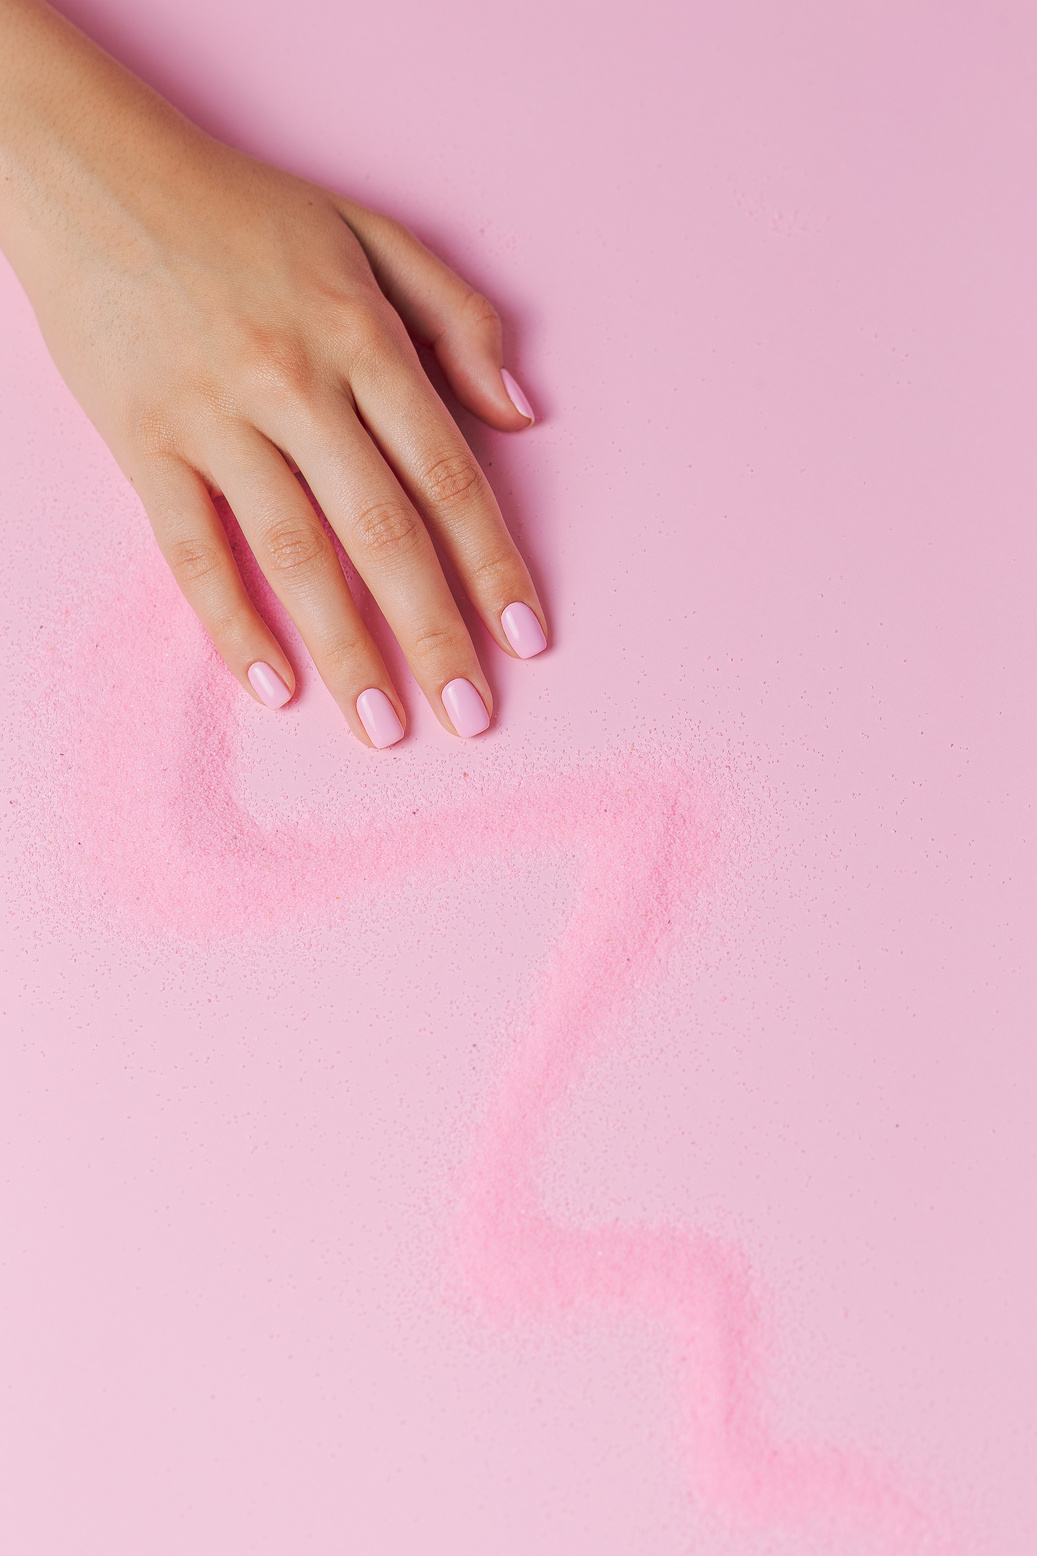 Hand on a Surface with a Trail of Pink Powder 